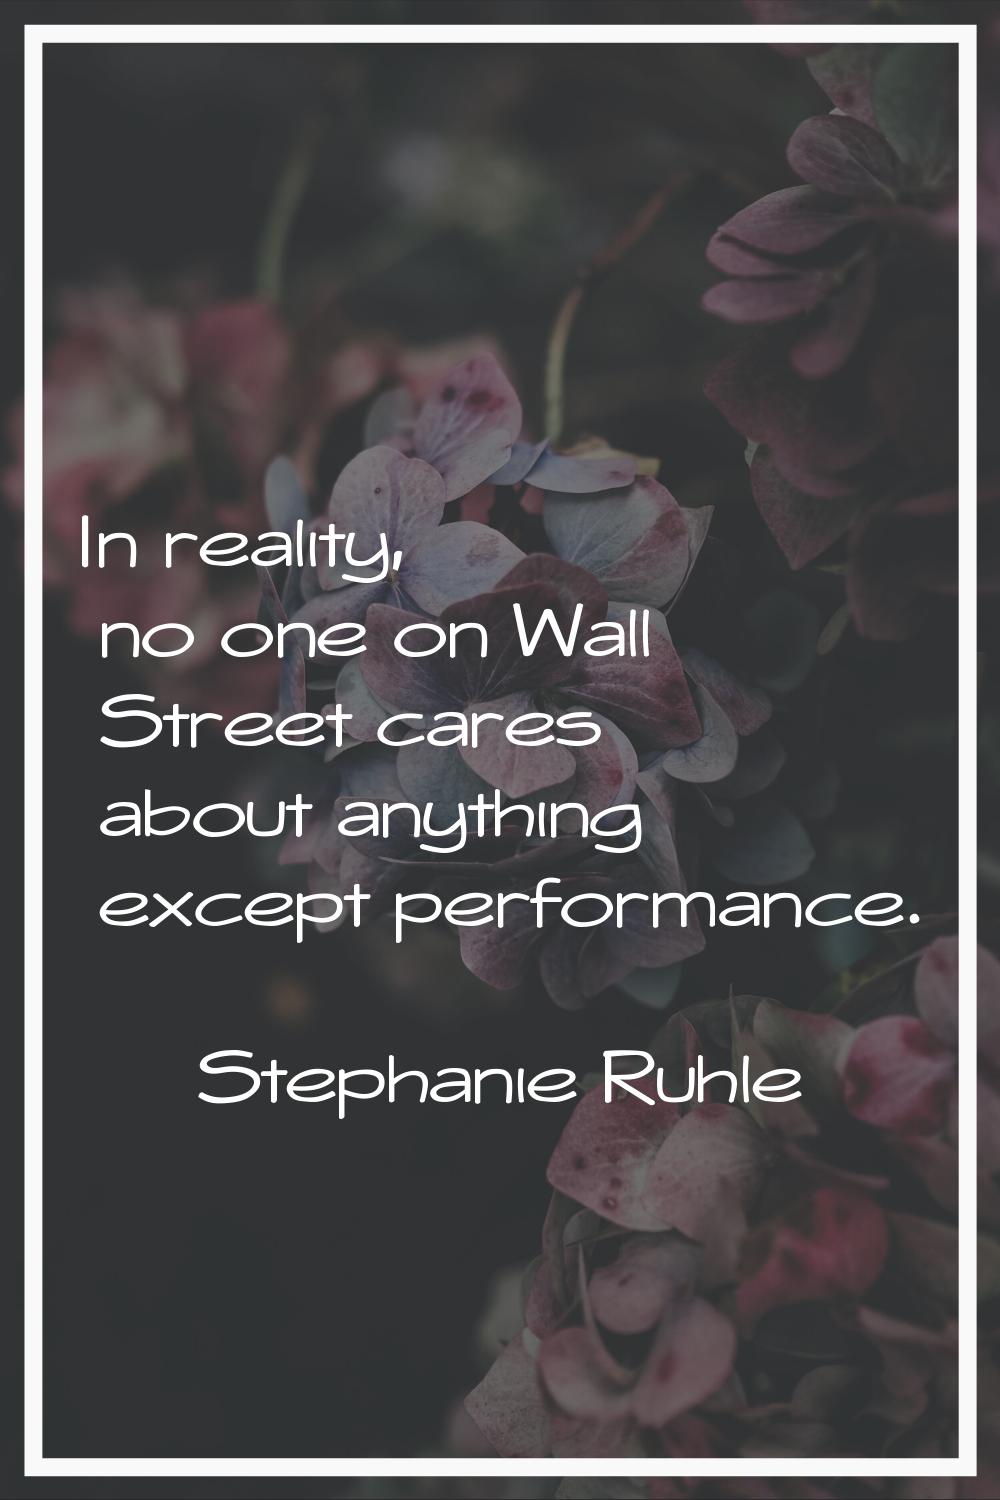 In reality, no one on Wall Street cares about anything except performance.